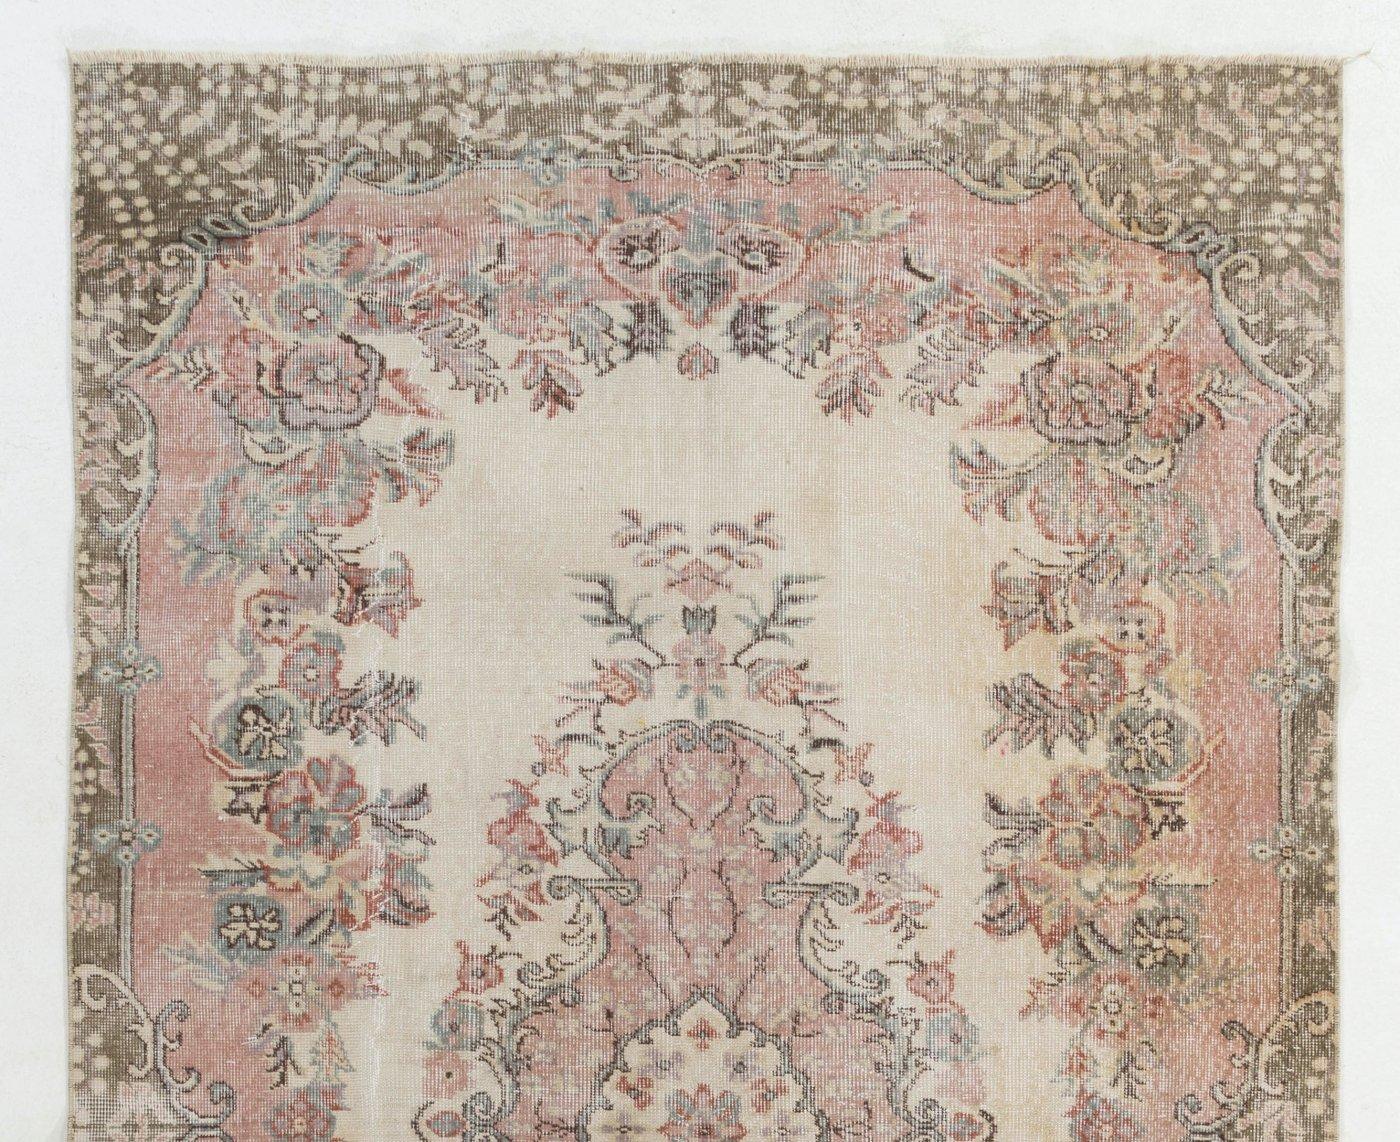 A hand-knotted vintage Turkish area rug. The rug features a floral medallion design in a field decorated with floral motifs. It has low distressed wool pile on cotton foundation, is in very good condition, sturdy and clean as a brand new rug.